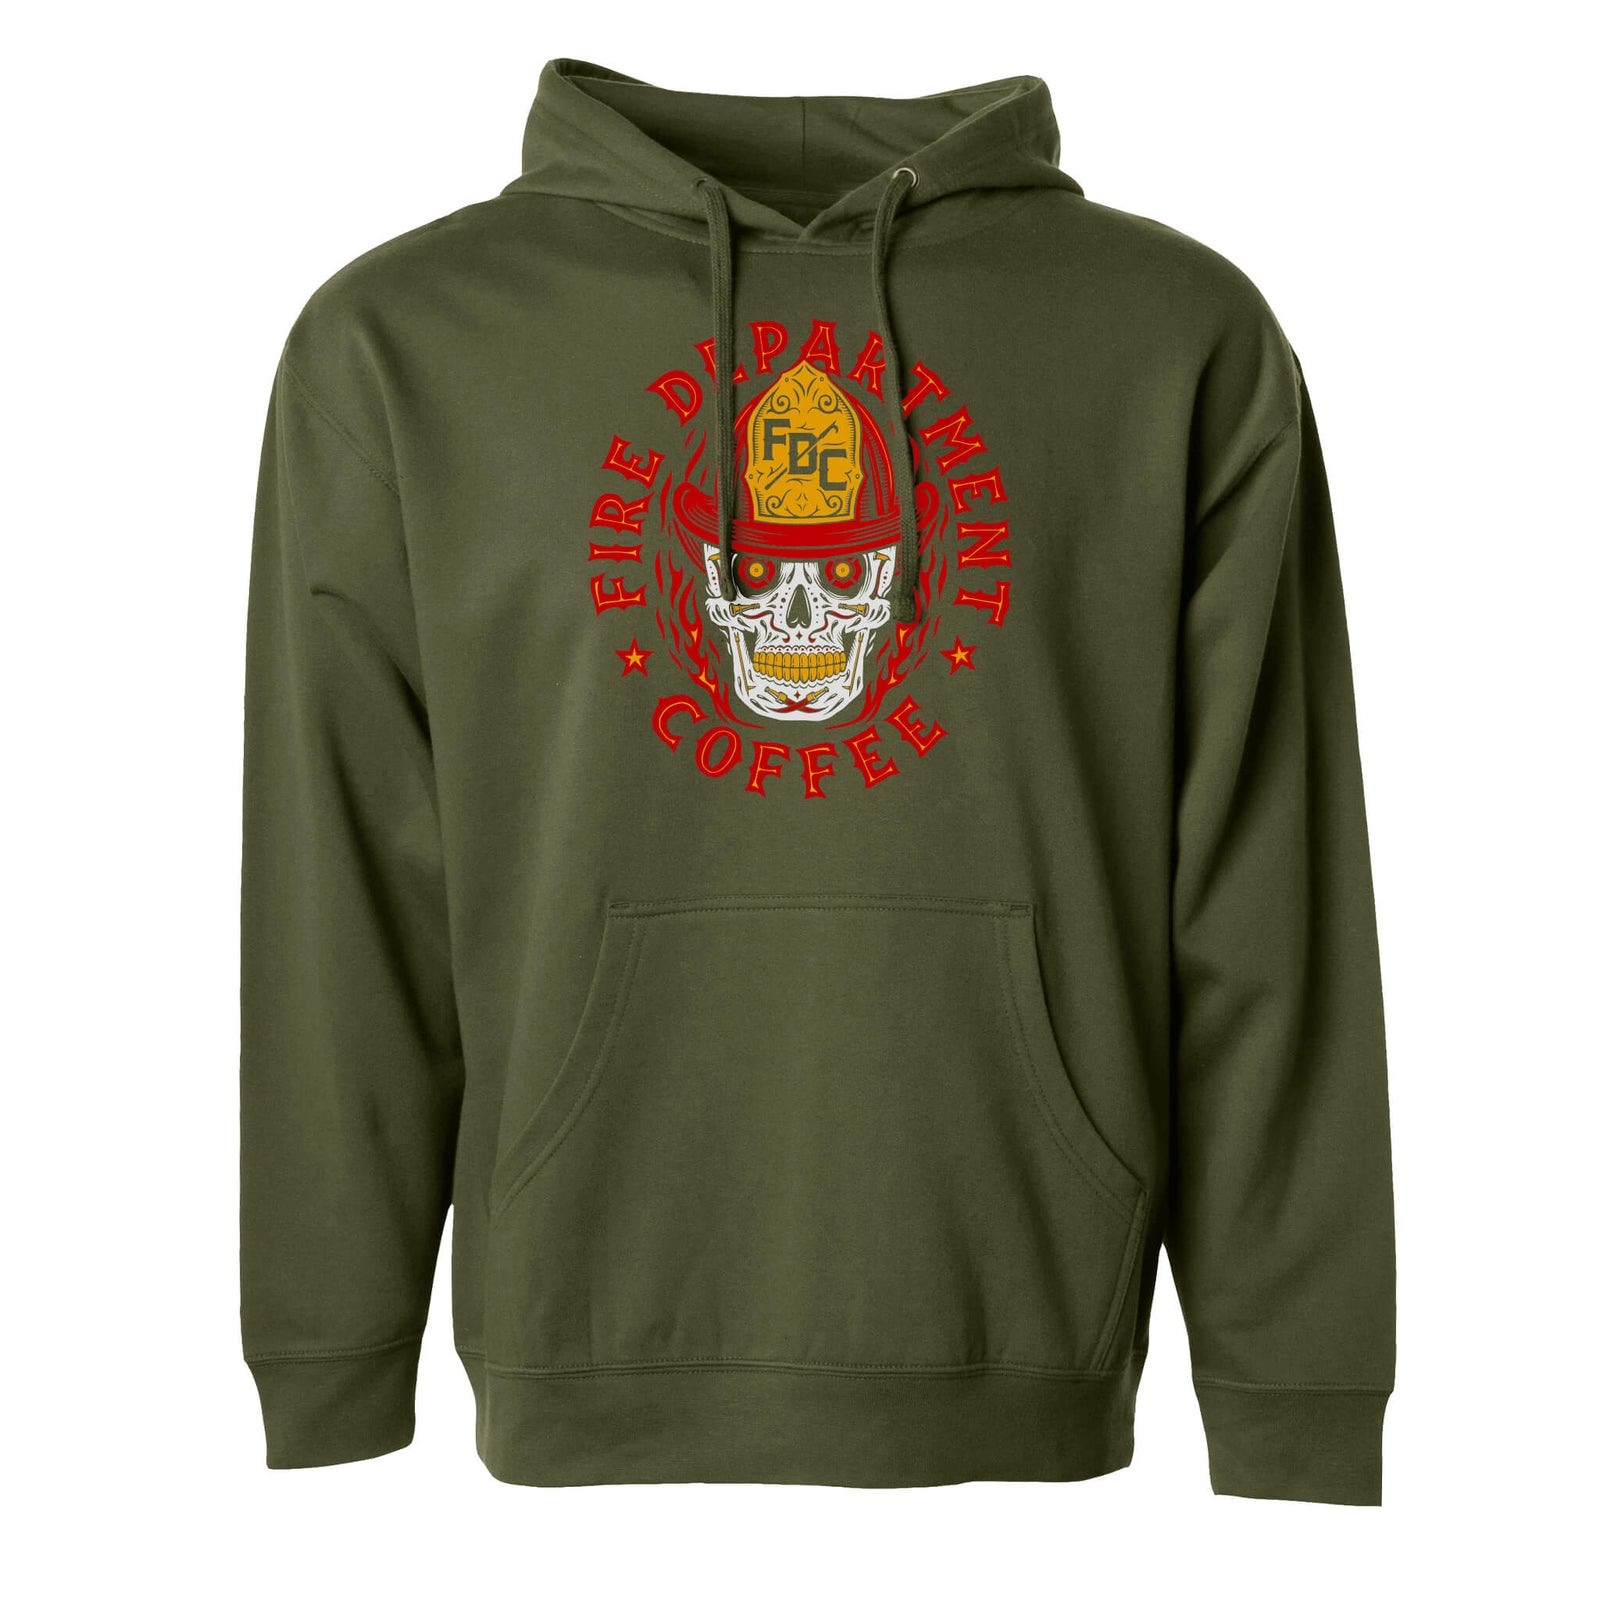 A military green hoodie with a skull design on the front and text that reads FIRE DEPARTMENT COFFEE